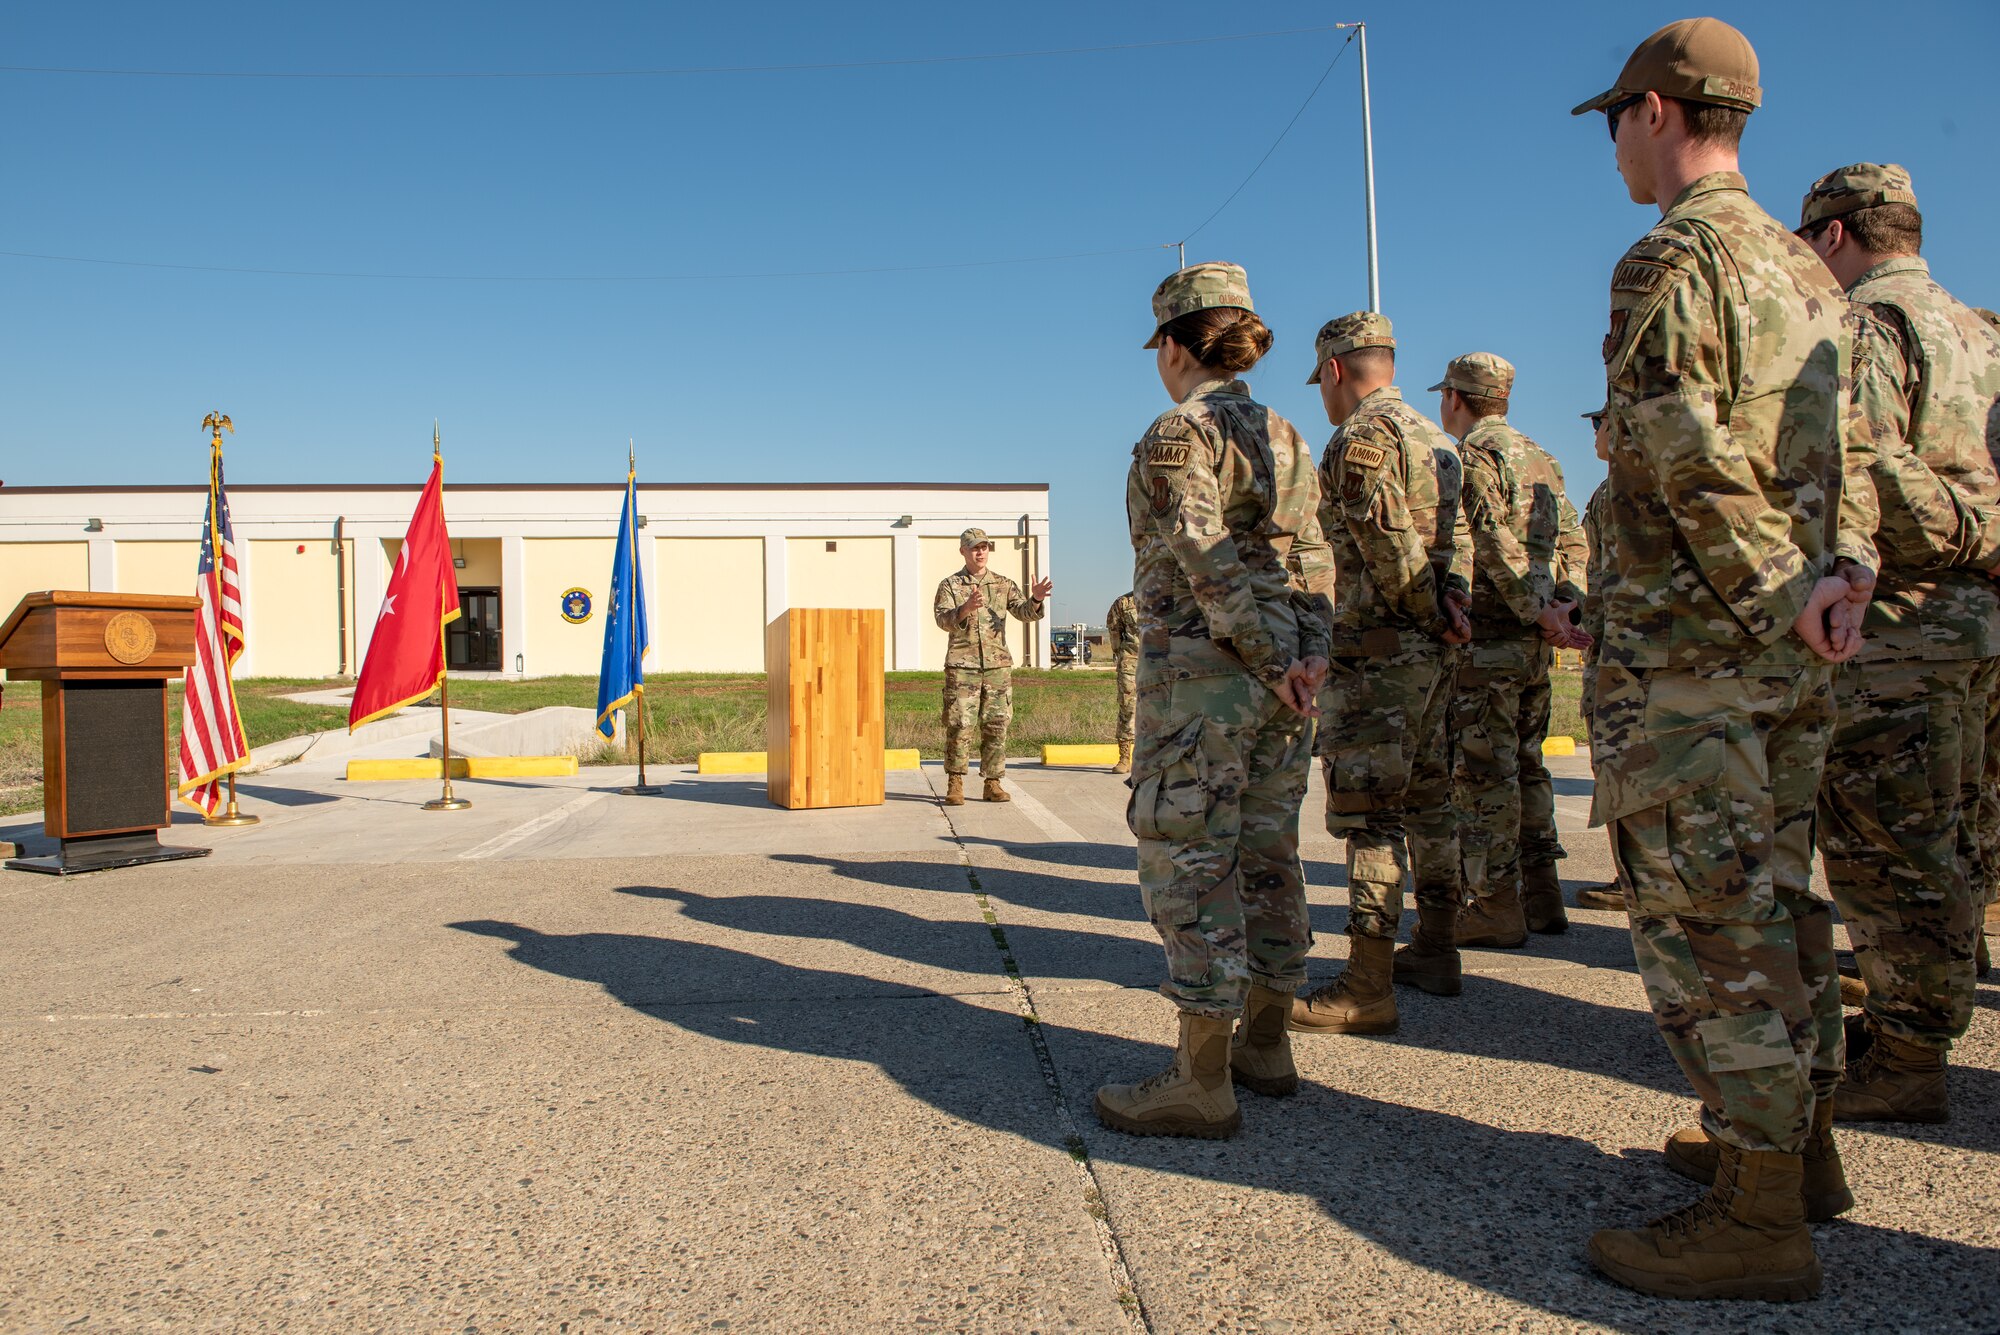 Col. Calvin Powell, 39th Air Base Wing commander, delivers remarks to Airmen assigned to the 39th Maintenance Squadron during the 39th MXS munitions flight building dedication ceremony at Incirlik Air Base, Türkiye, Dec. 19, 2022. The 39th MXS munitions flight building was designed to provide a streamlined means of communication within the ammunitions flight and assist Airmen in building camaraderie and teamwork. The building also provides better protection for munitions assets controlled by the flight and consolidates six sections into a single building, increasing productivity for current and future Airmen. (U.S. Air Force photo by Senior Airman David D. McLoney)